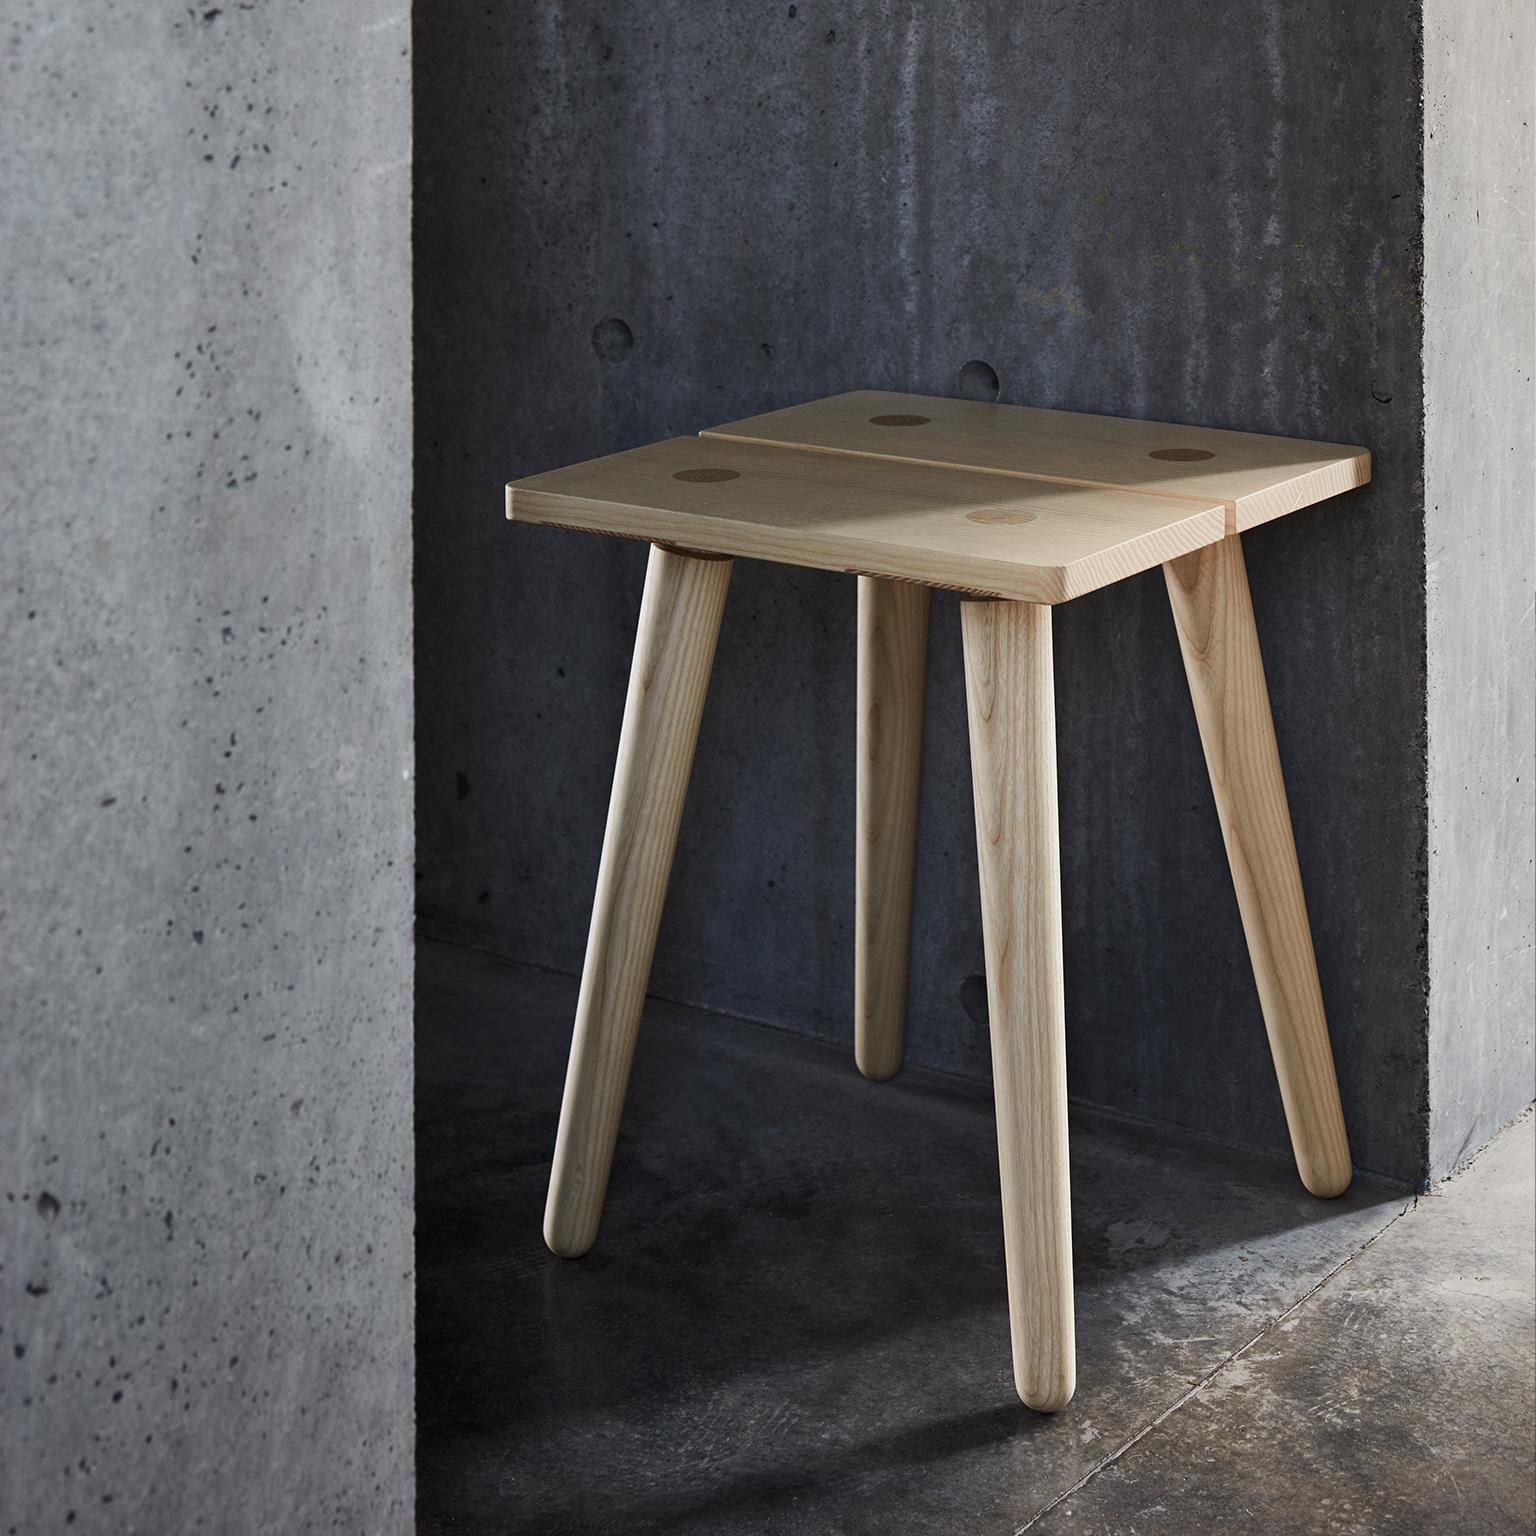 The Stabellenstuhl, or stable stool, is our modern take on a Swiss staple, found inside any Alpine home. Its 100% solid European ash seat is held together by turned legs and strong joinery. Any weight applied to the seat gains extra stability